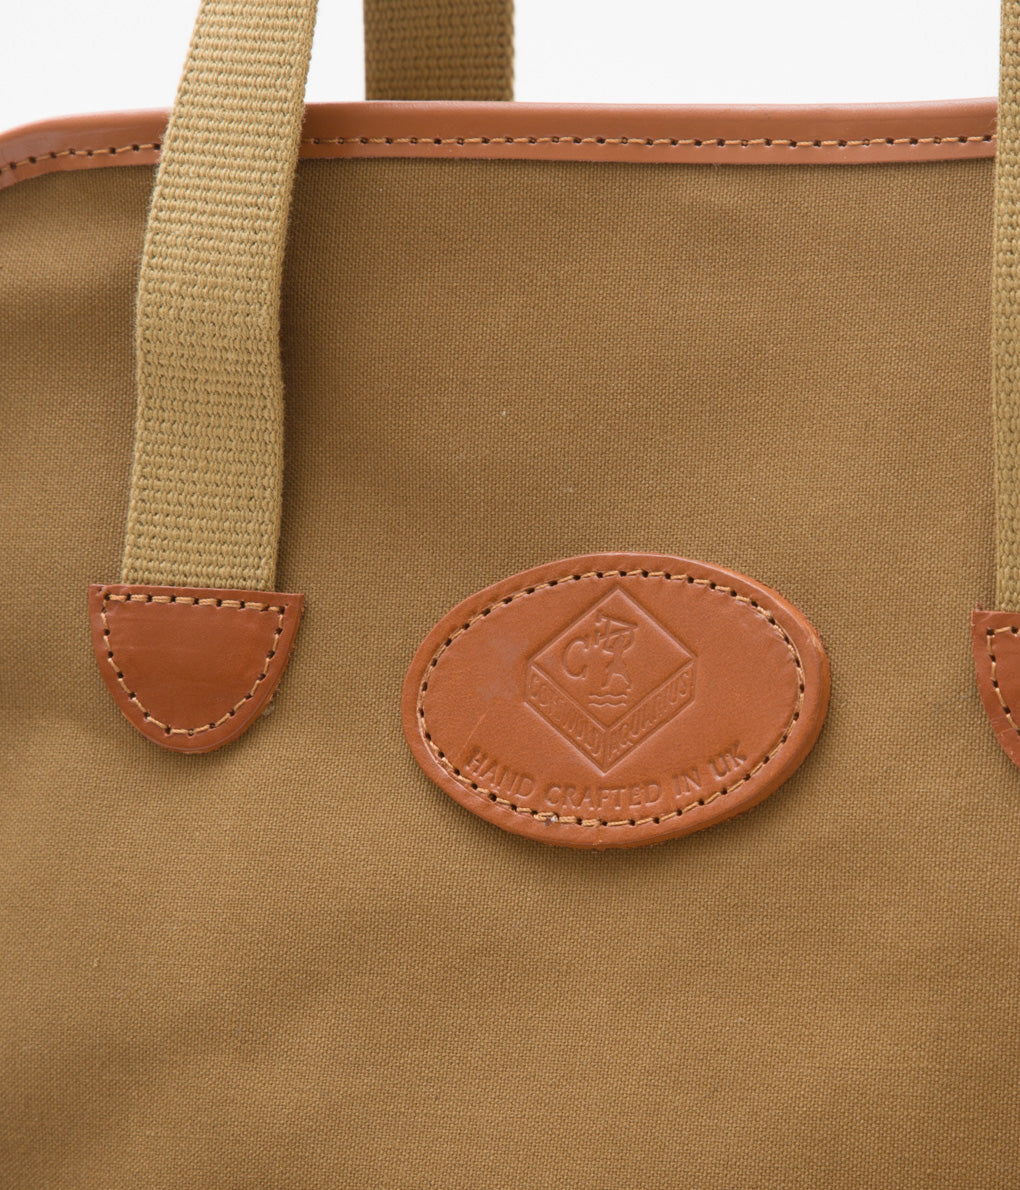 COTSWOLD AQUARIUS "CANVAS FLY TOTE" (BROWN)